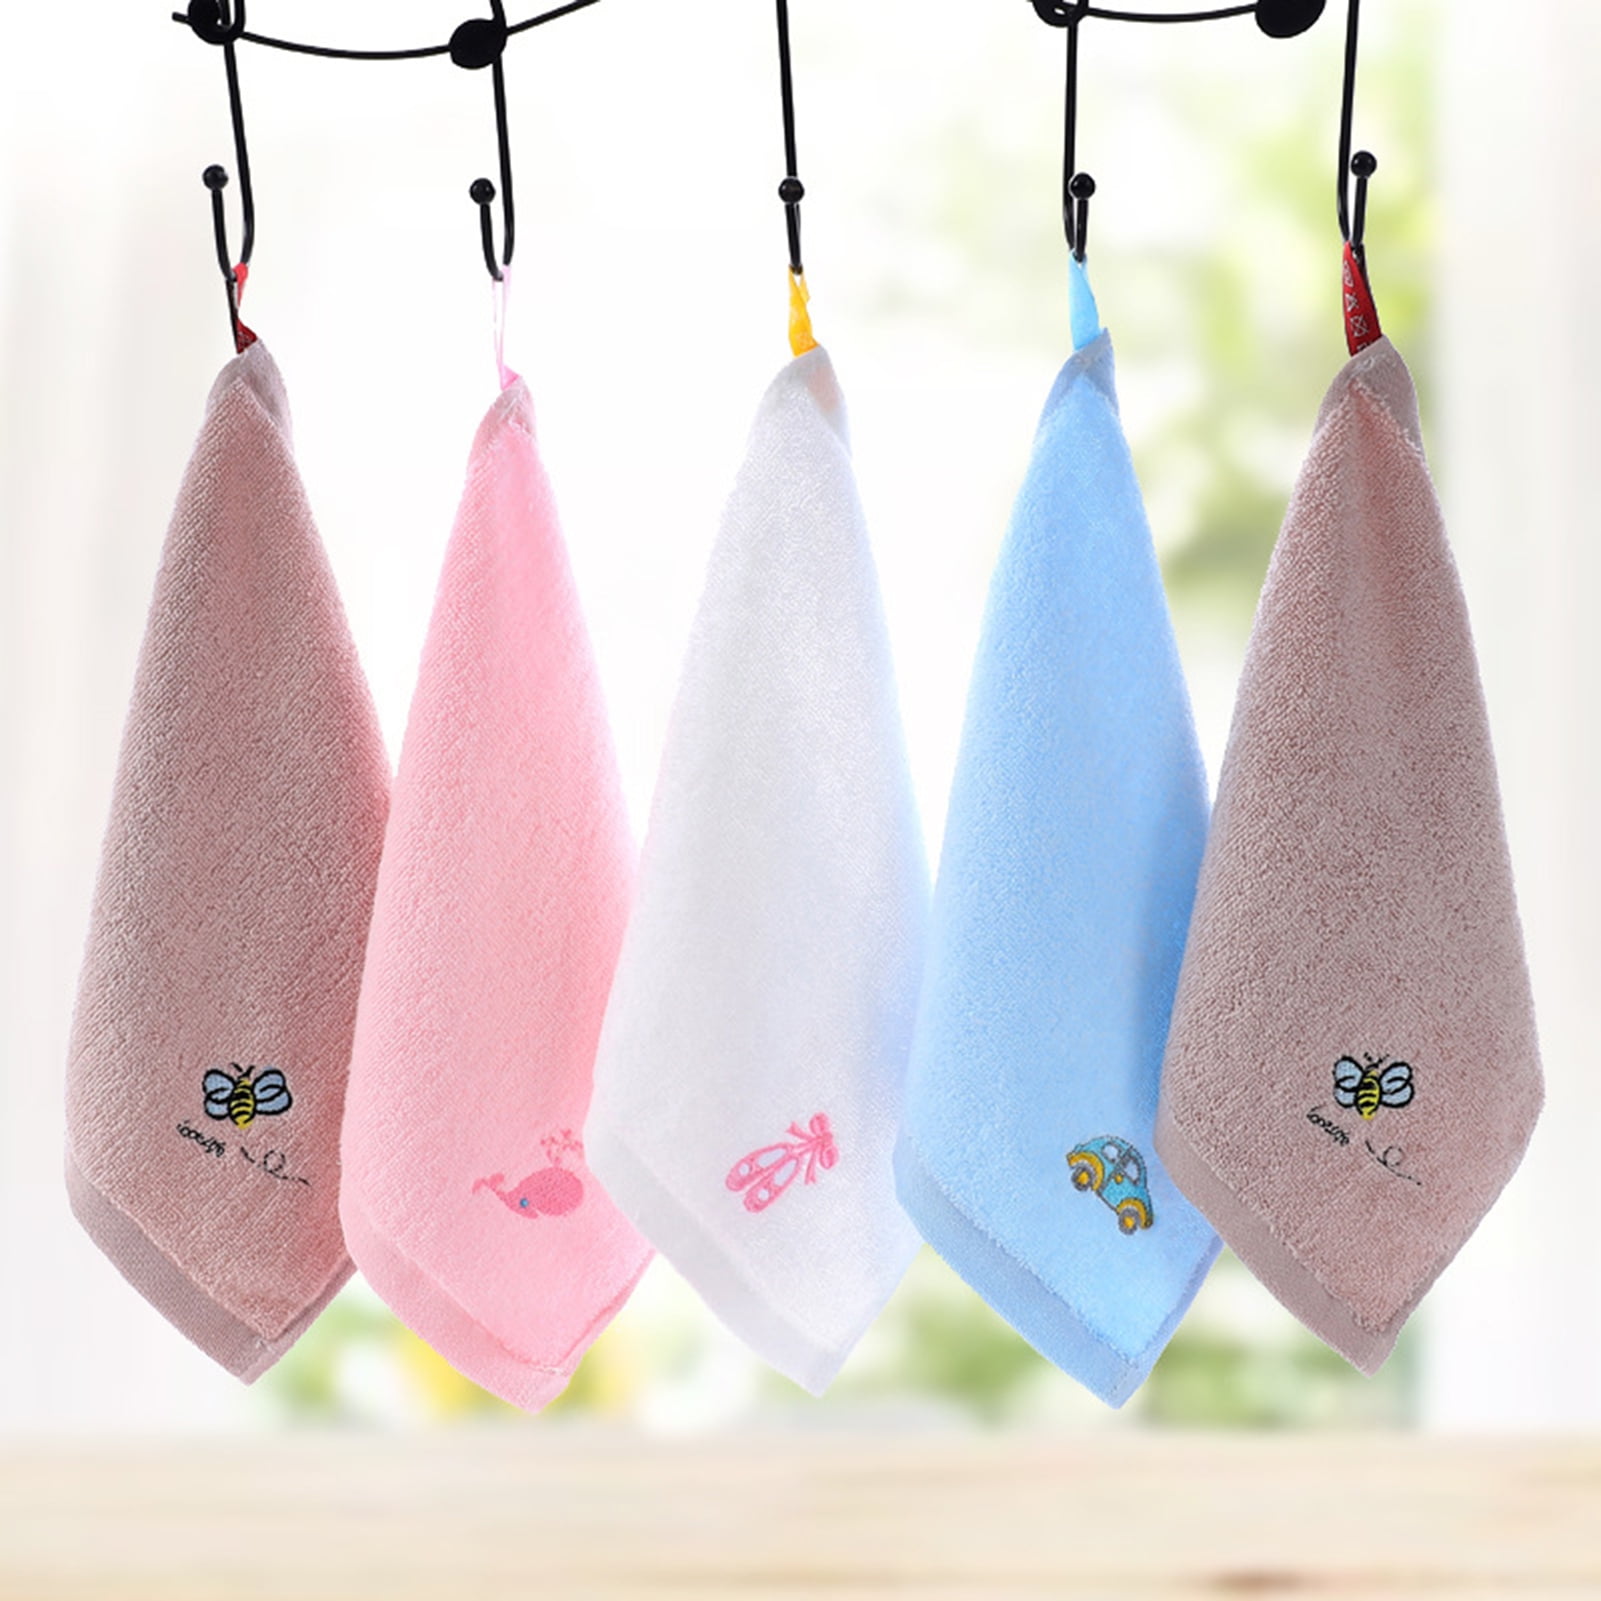 Details about   Exquisite Cotton Face Towel Smooth Quick-dry Baby Infant Soft Square Towel 